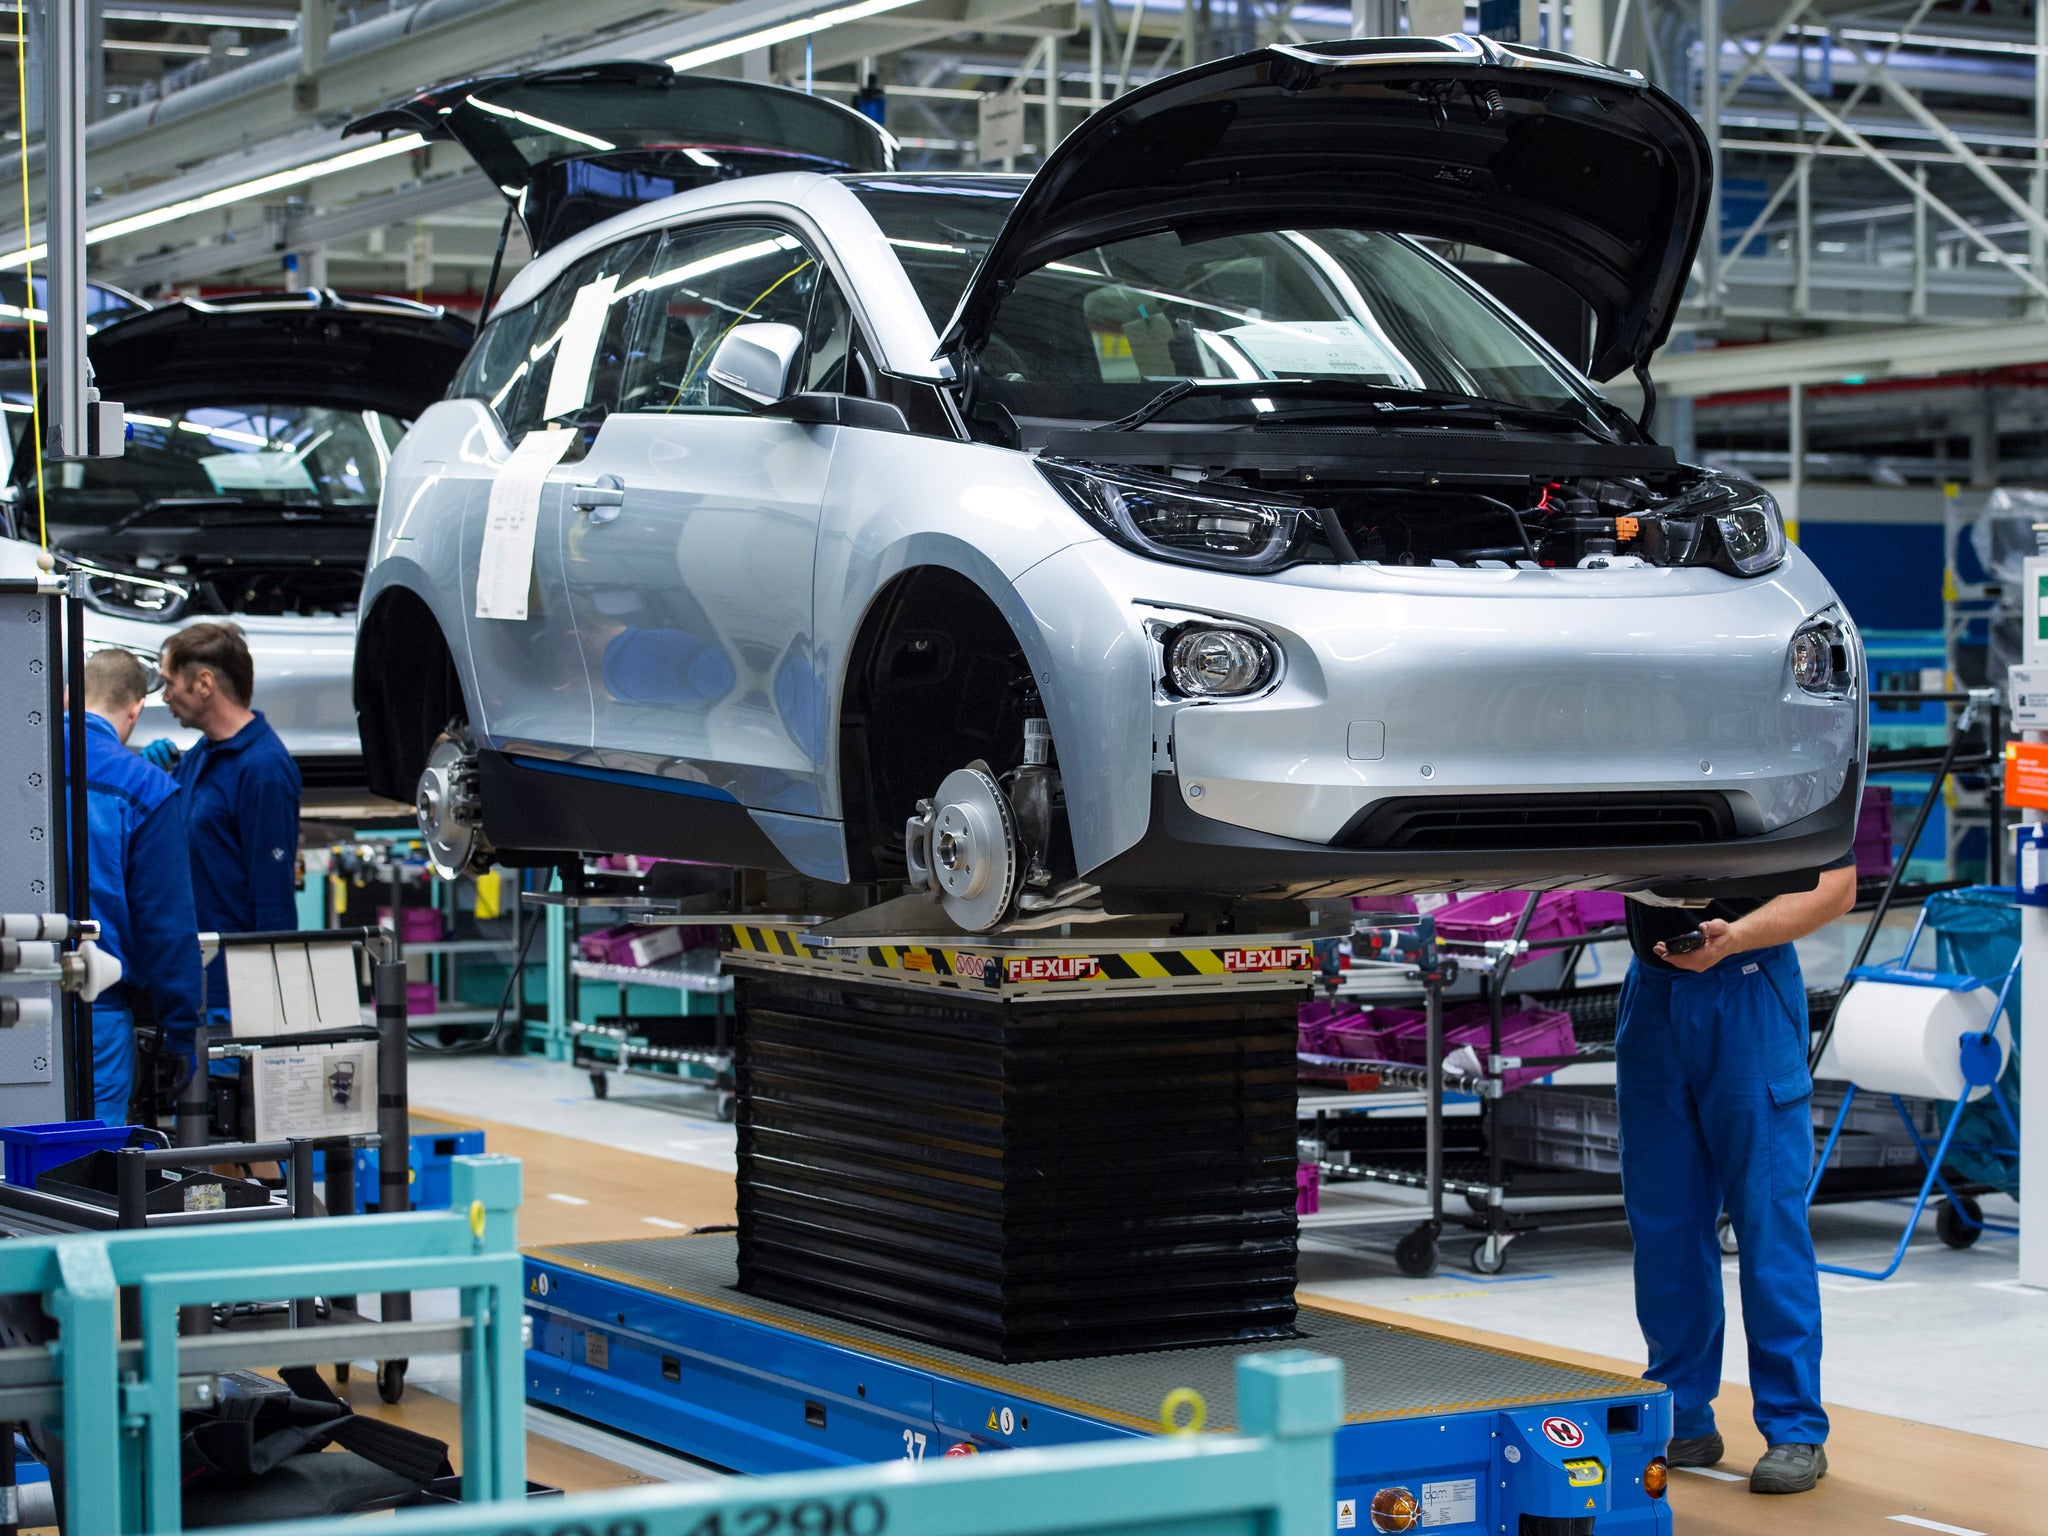 File photo: Workers at BMW factory assemble an i3 electric car